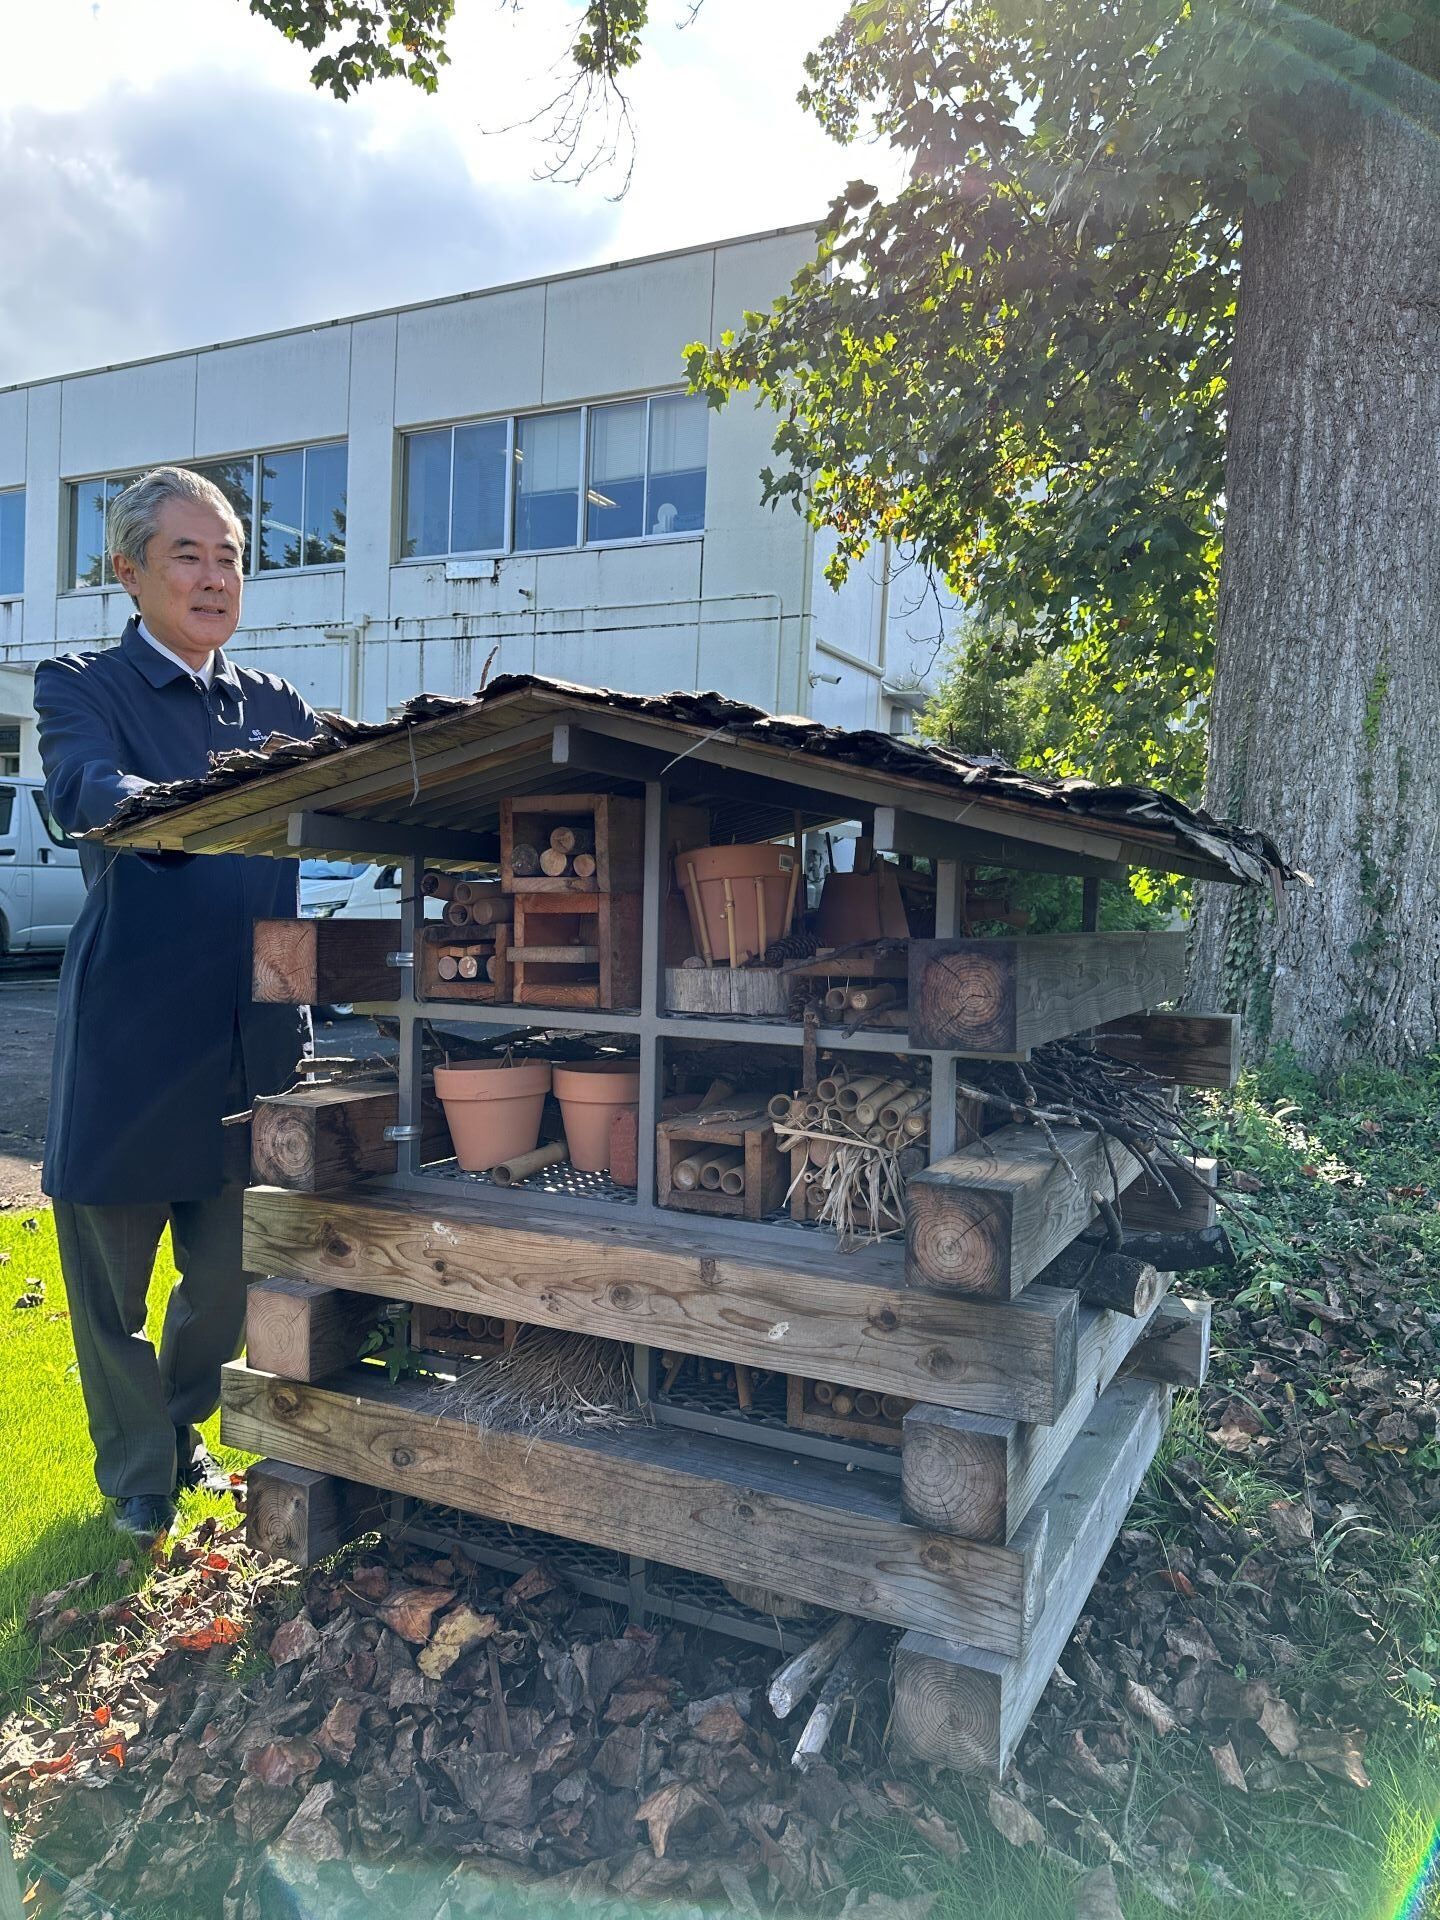 The insect hotel